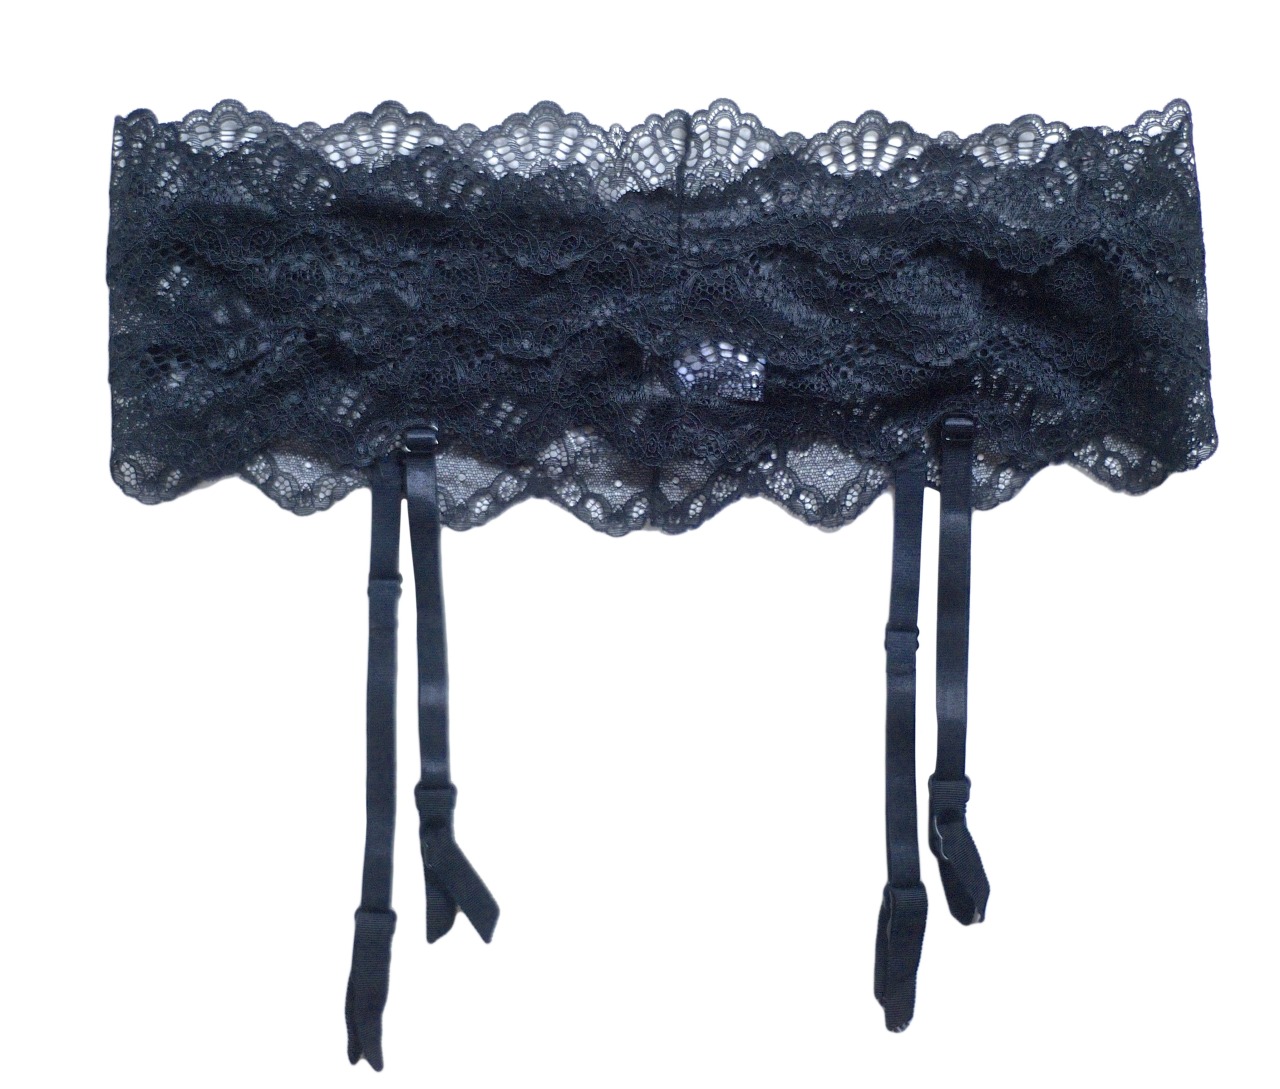 A black lace garter belt from The Giving Bride....